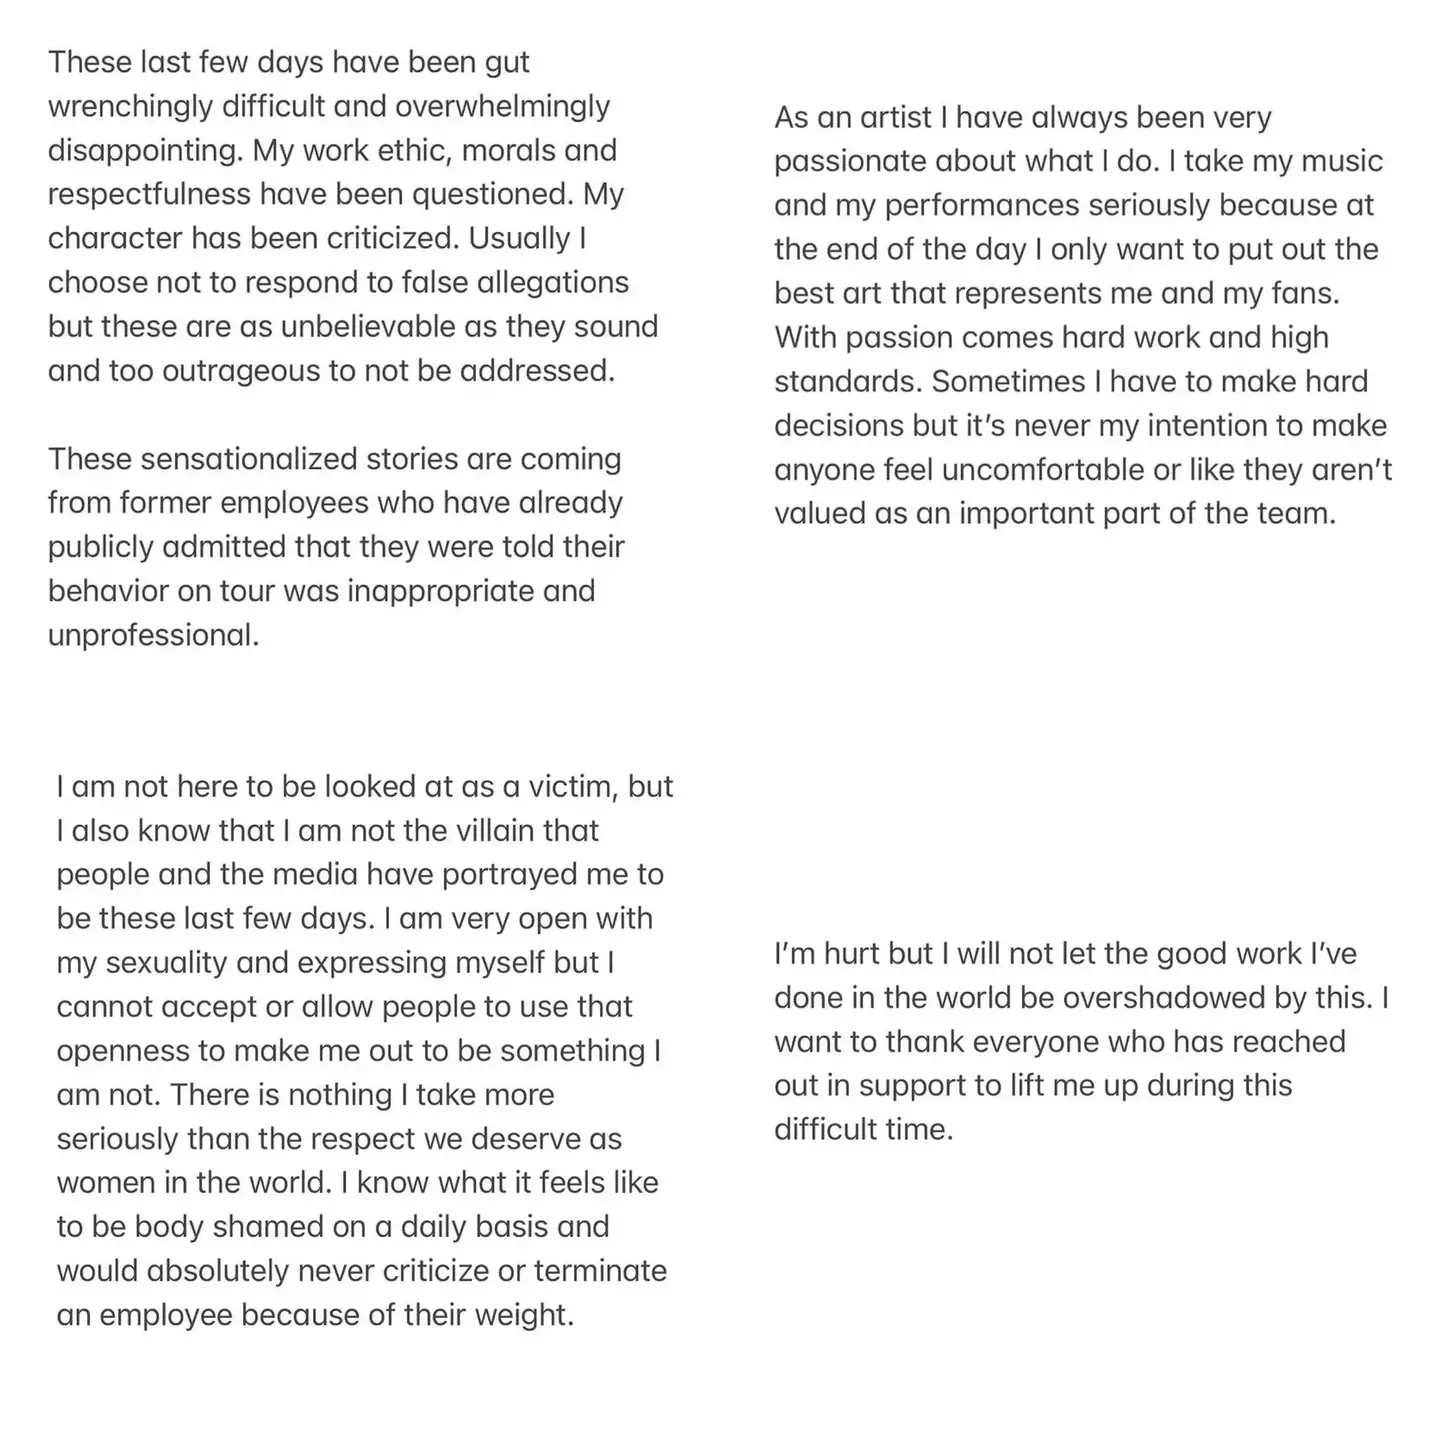 Lizzo's statement in response to allegations against her.